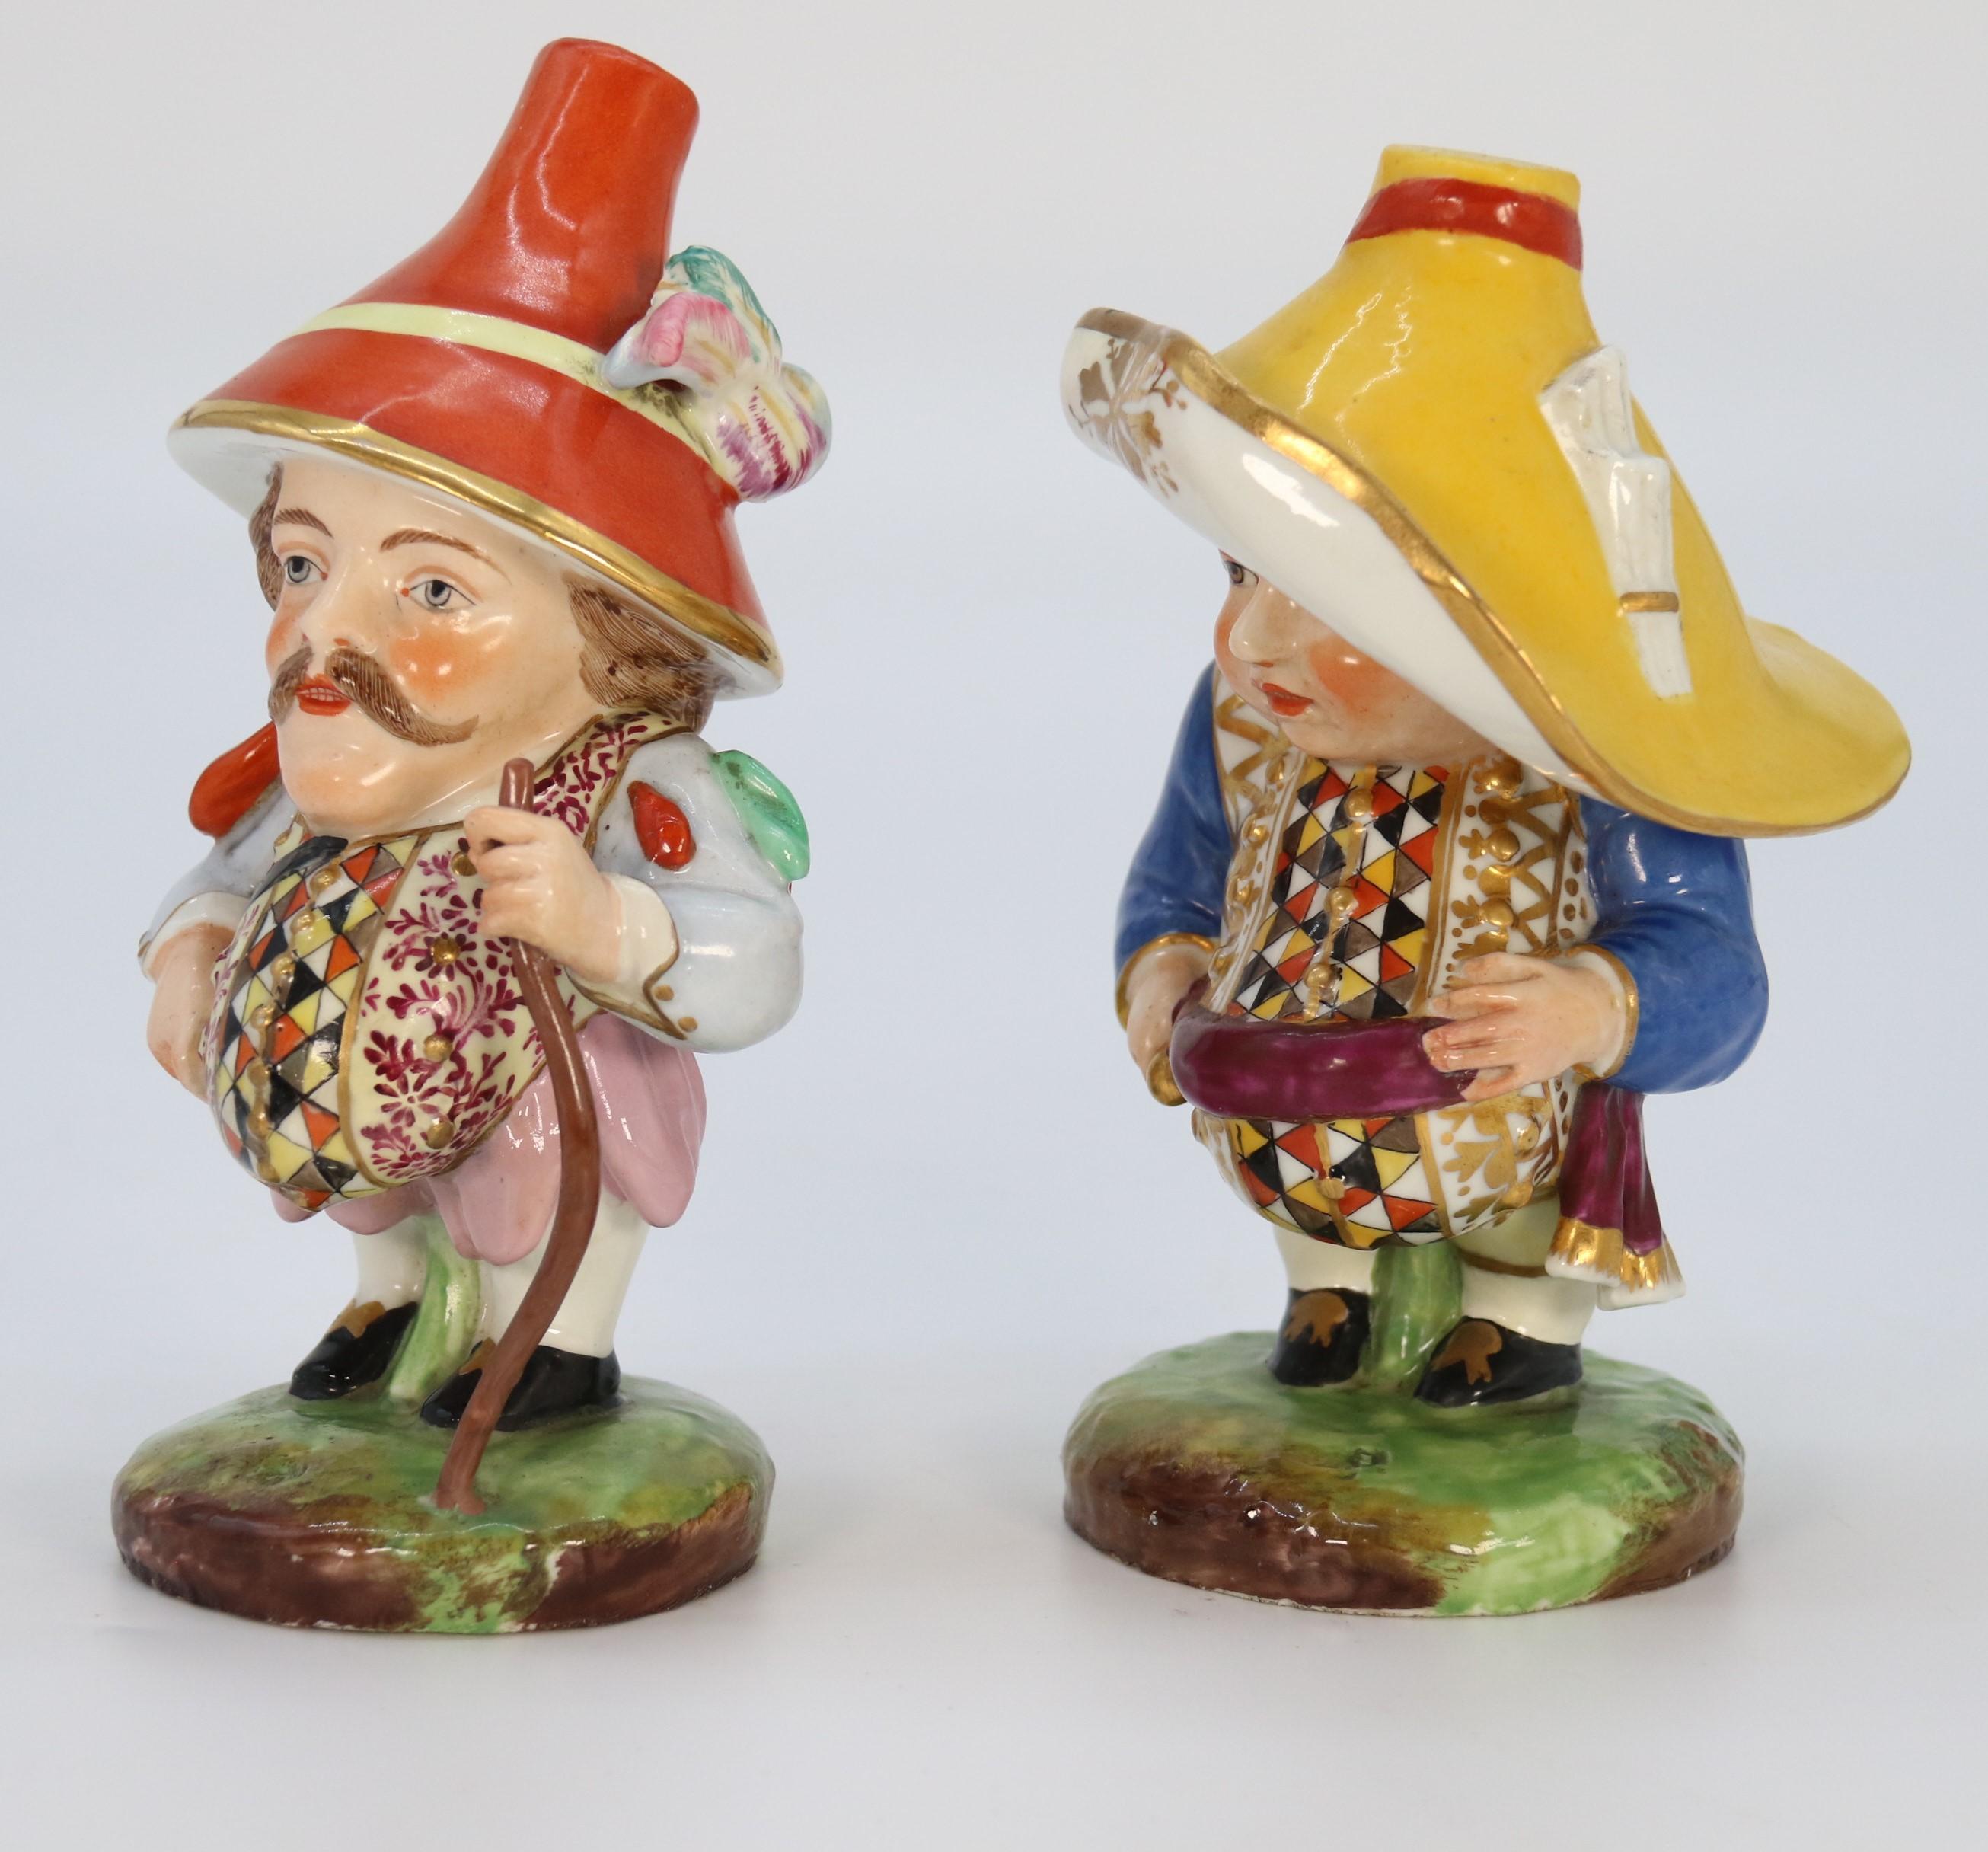 
This superb large and highly decorative pair of 19th century Mansion House dwarfs are in the style of early Derby examples reproduced by the famous French Paris factory Samson who was well known fakers and imitator of famous high end factories and